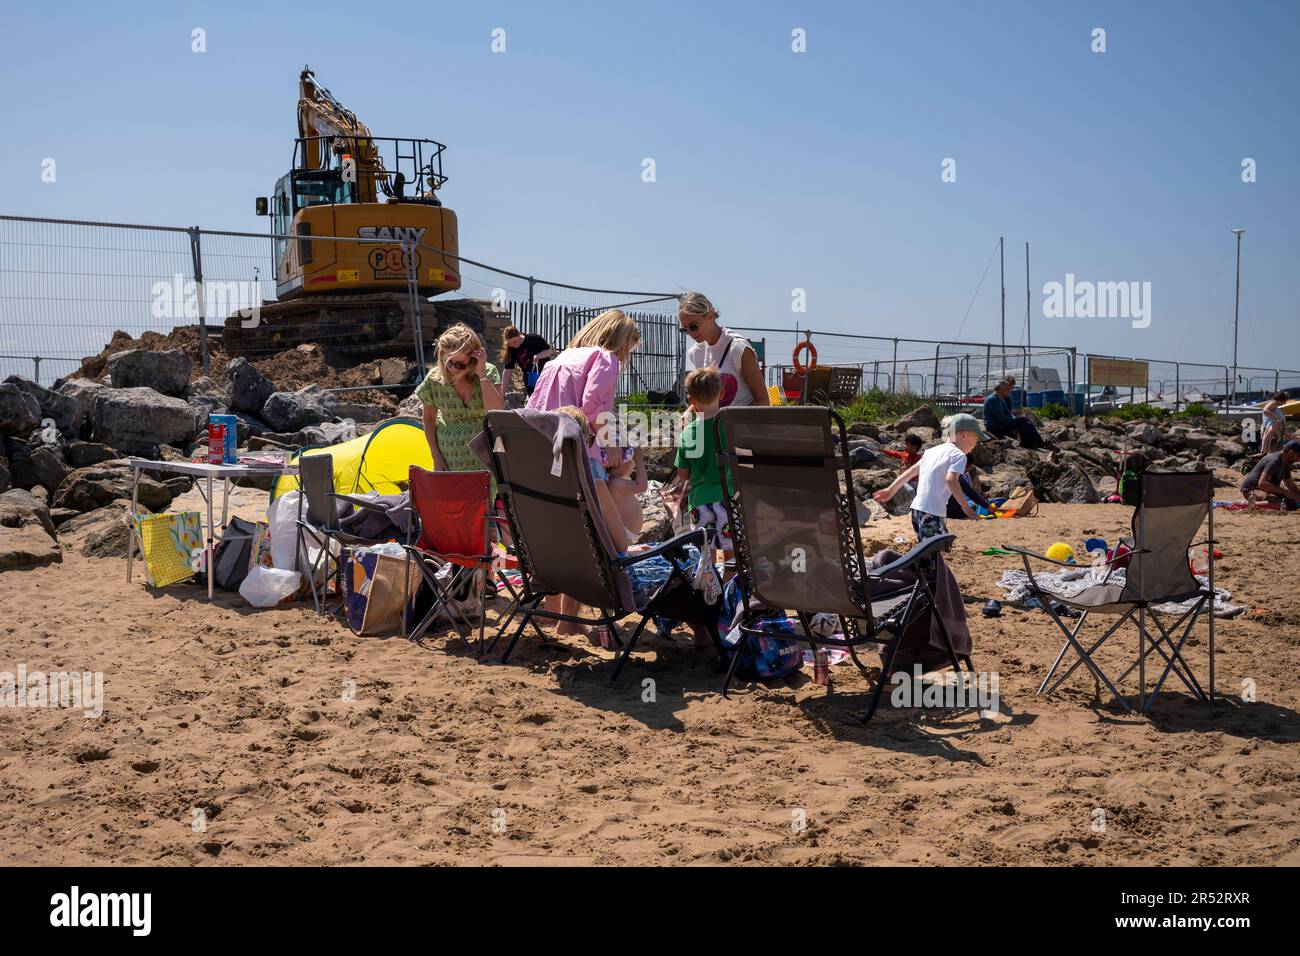 West Kirby Beach, The Wirral, Merside, UK. People enjoying the a hot day at the beach. Stock Photo